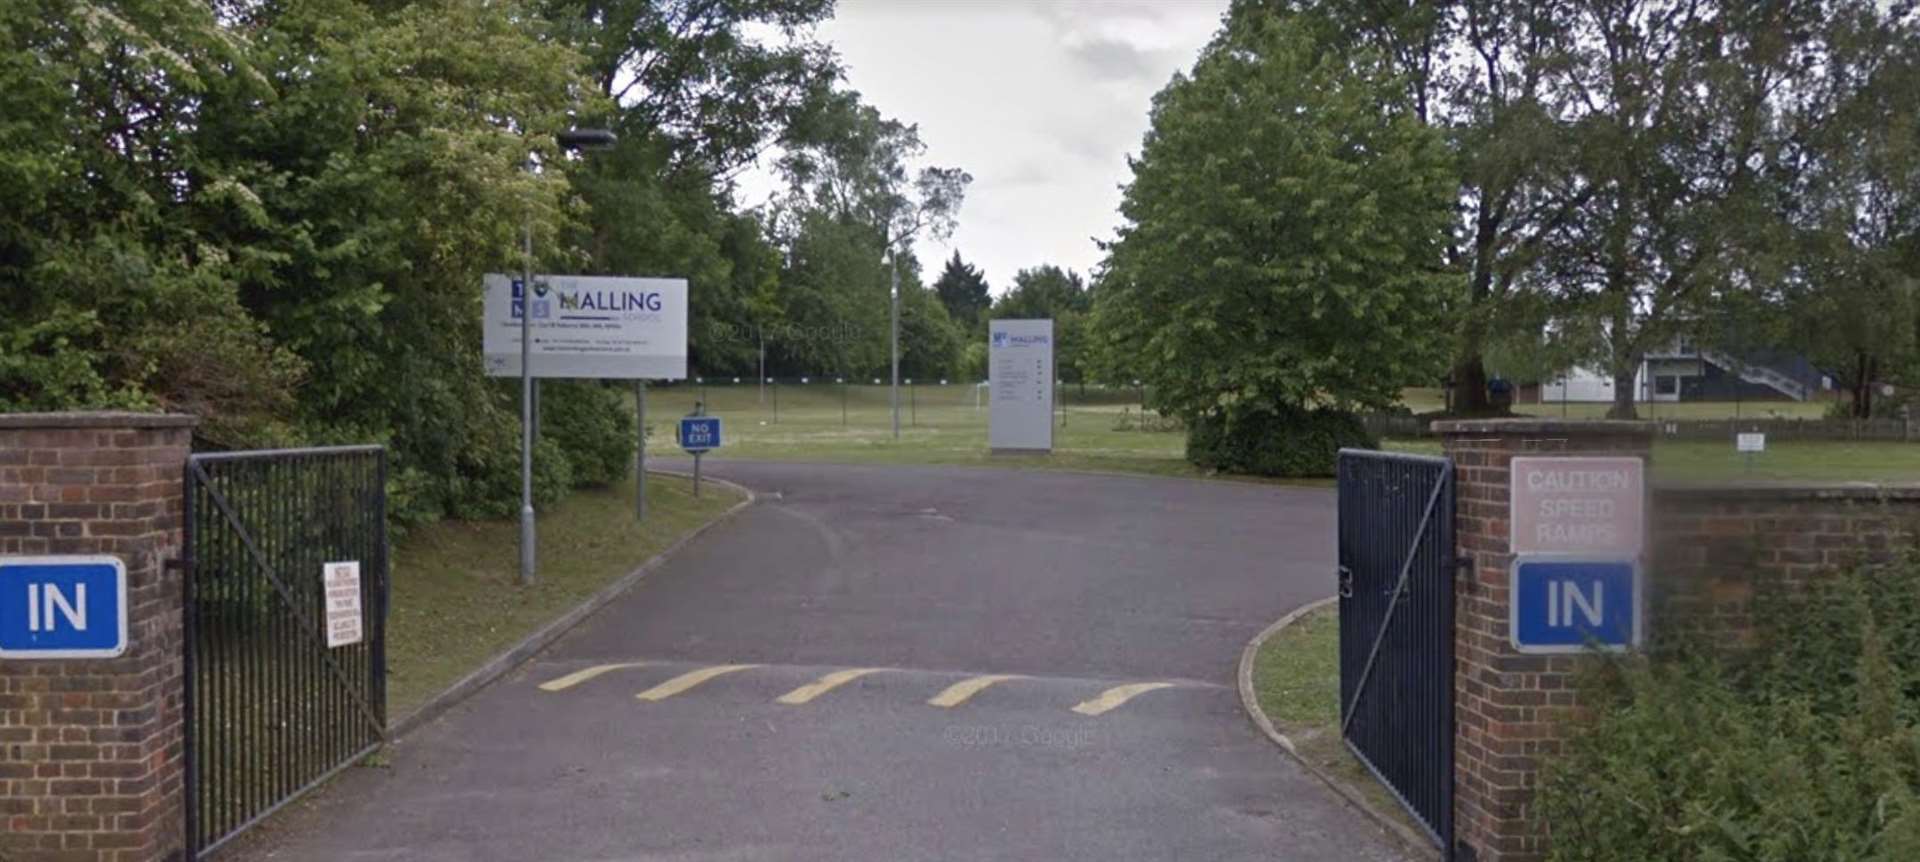 The Malling School in Beech Road, East Malling. Picture: Google Street View